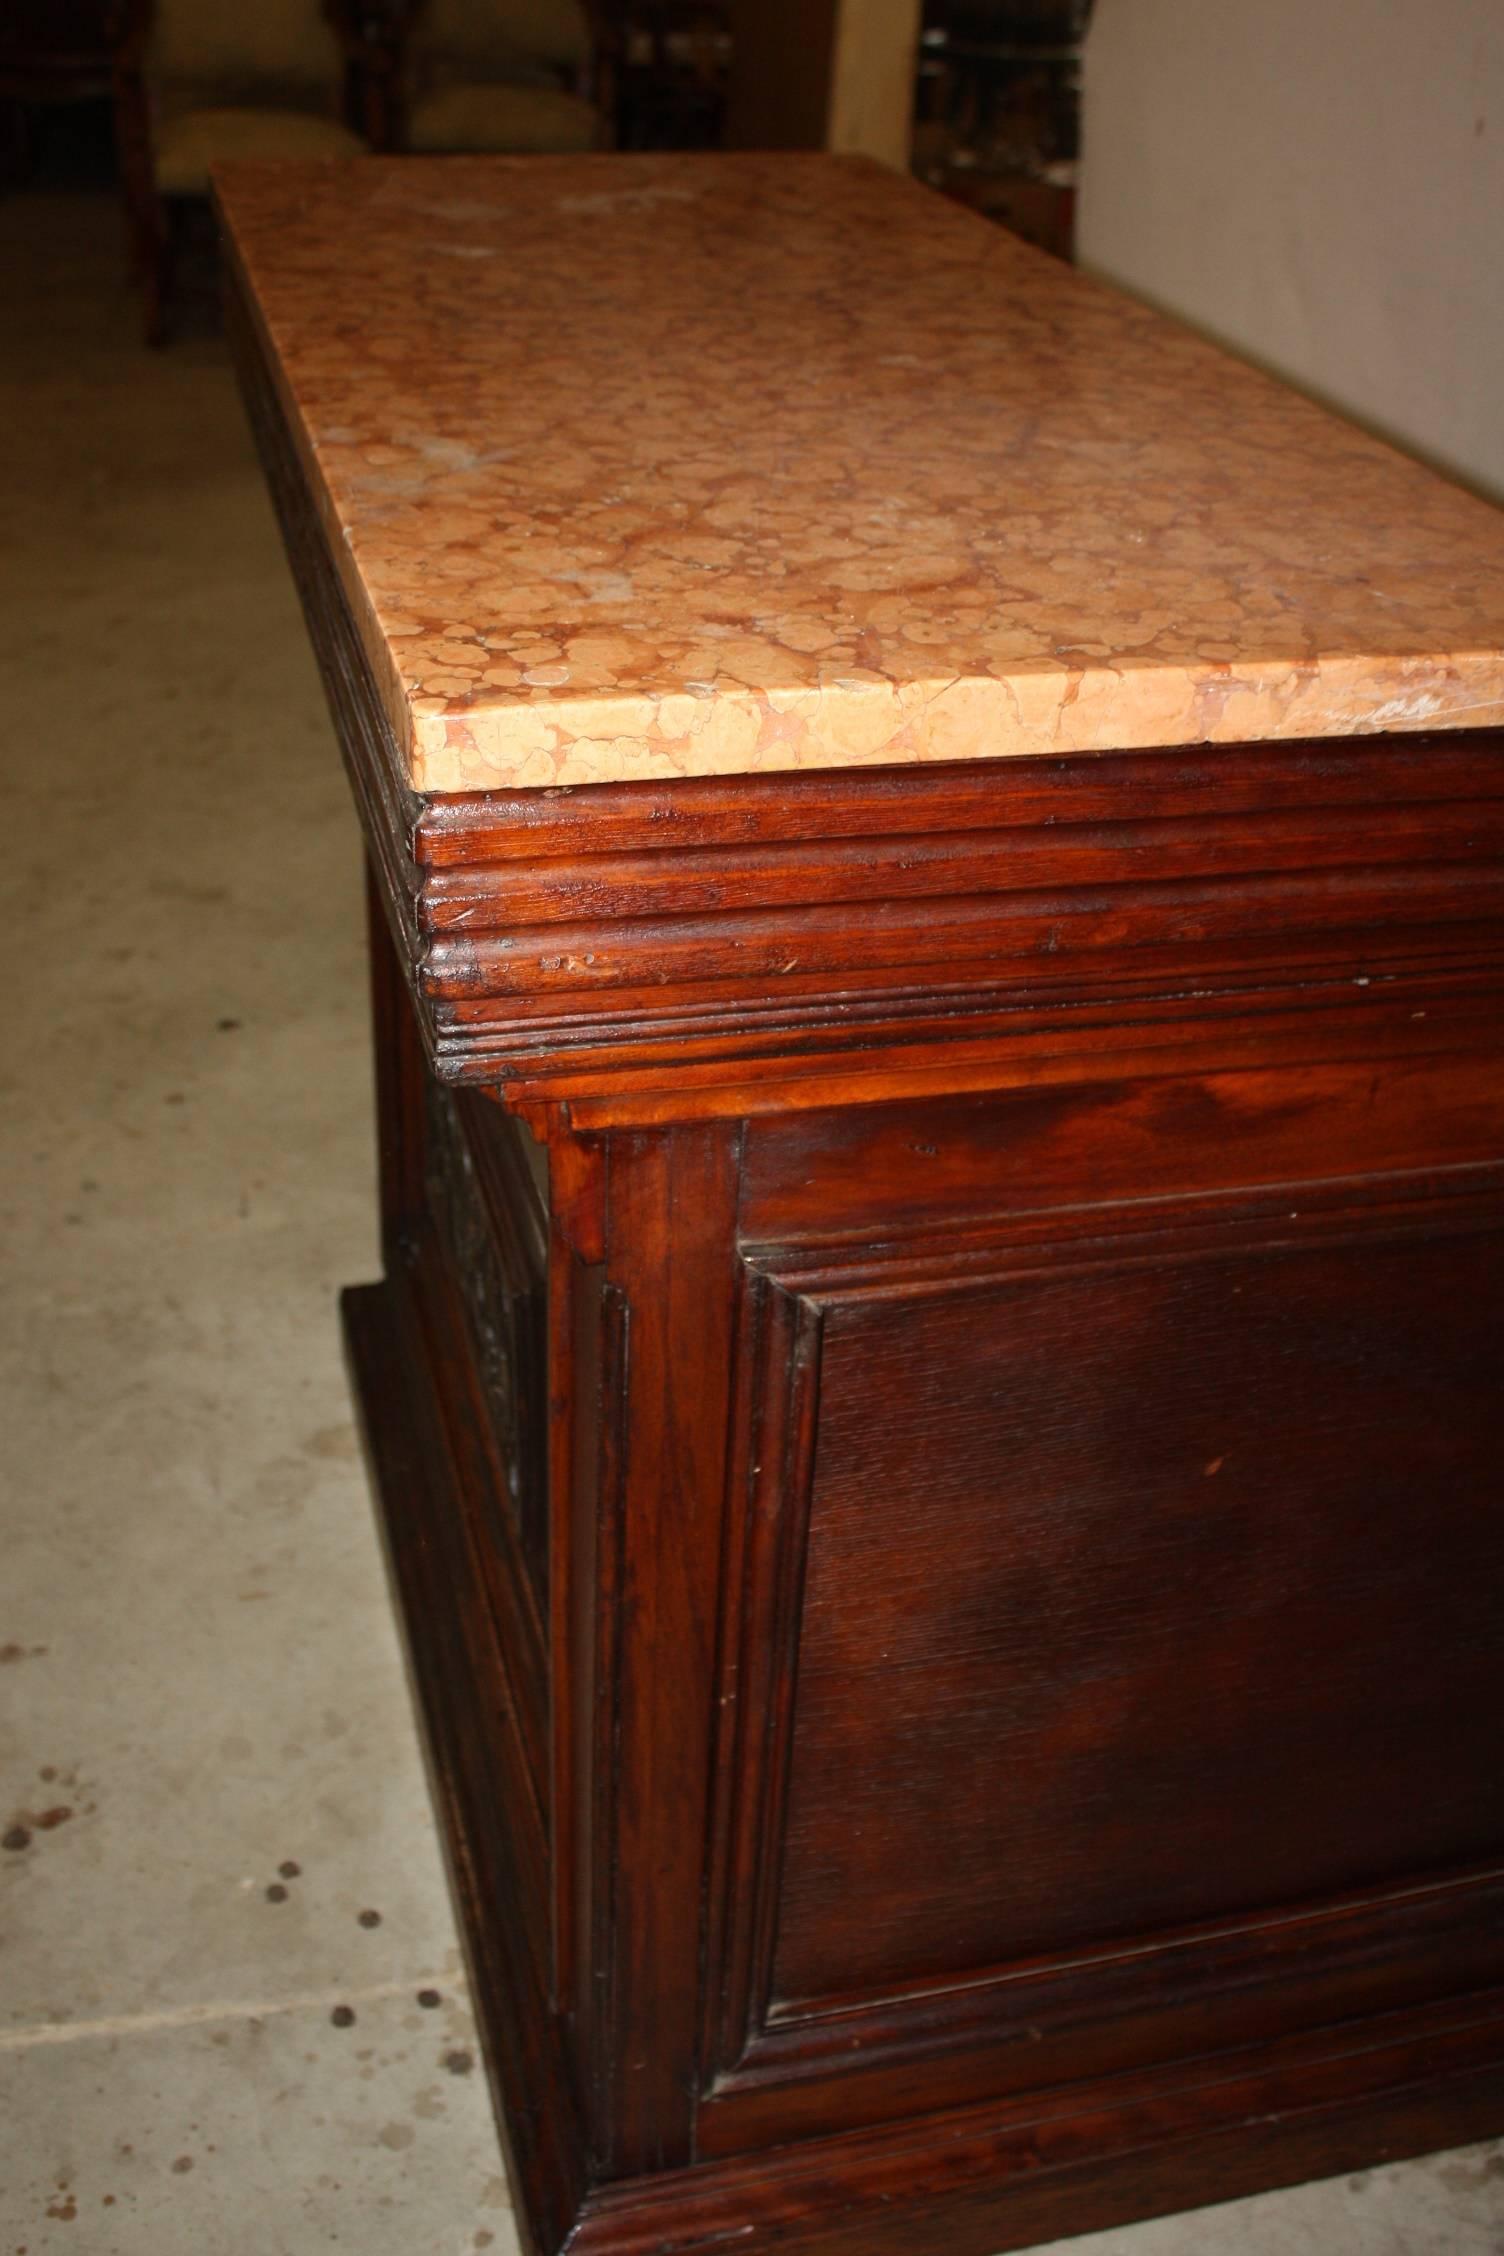 Marble top L shaped bar. The depth of the front part is 19.75